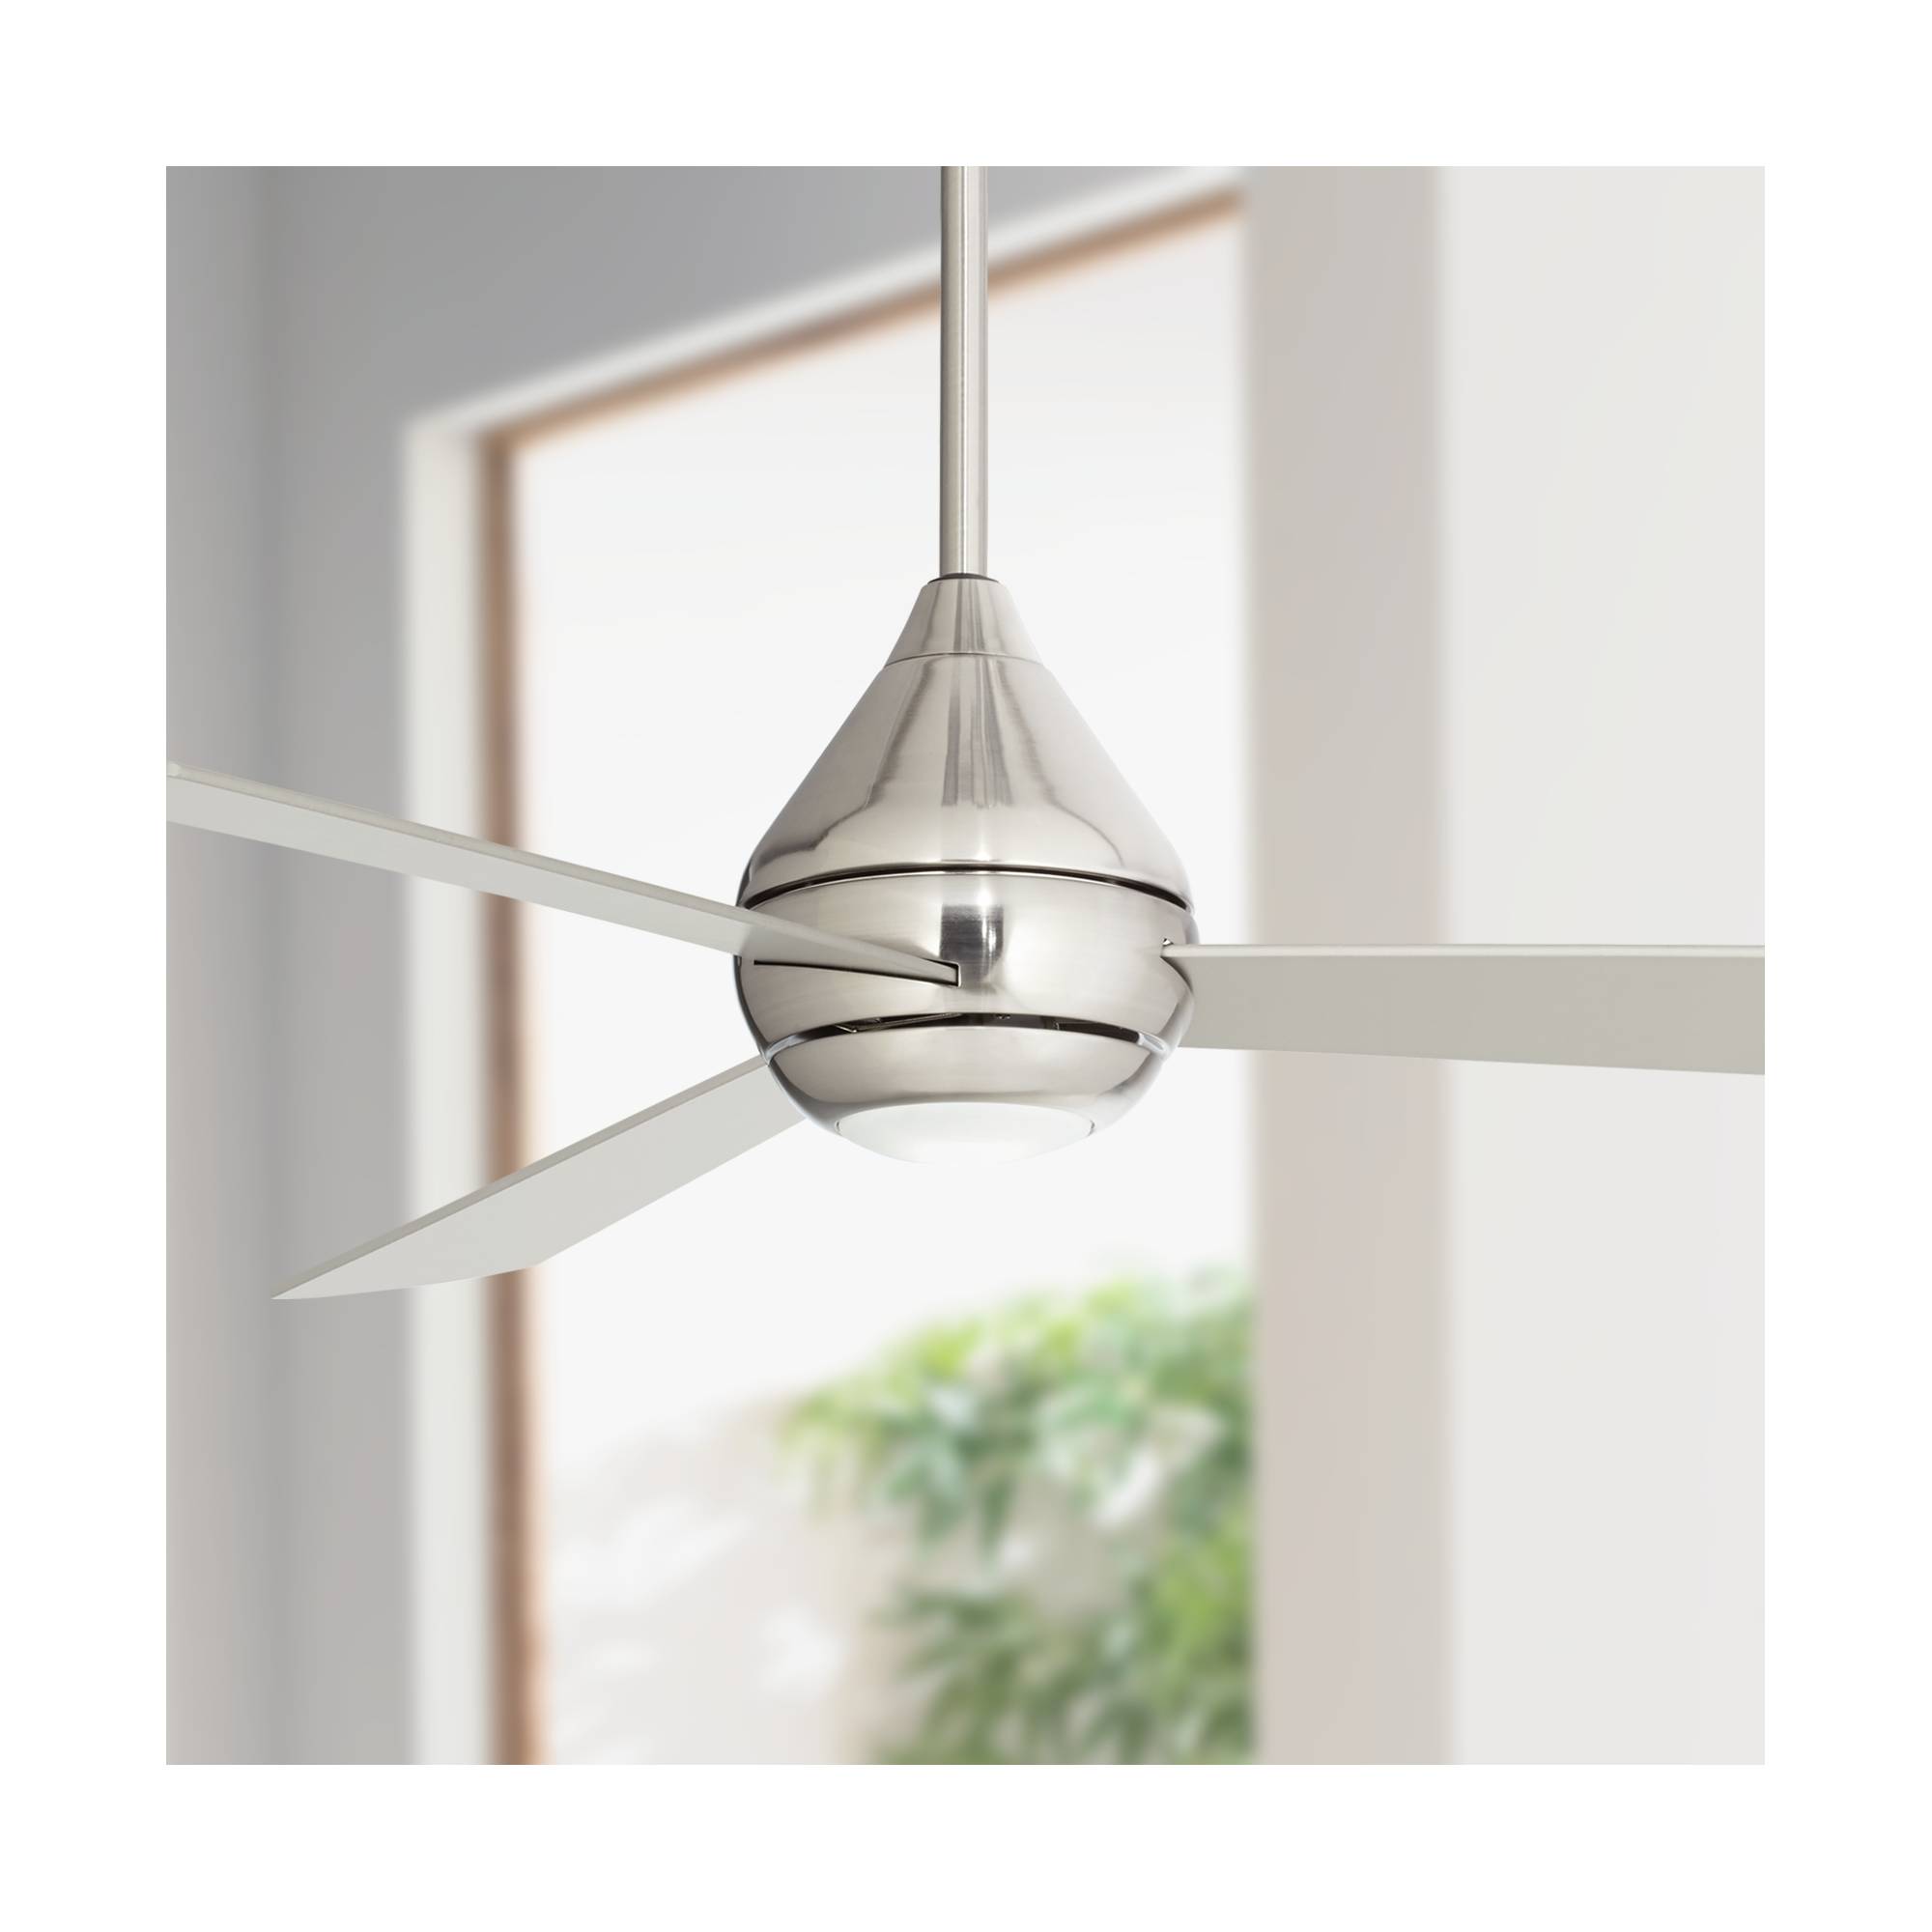 Details About 52 Modern Ceiling Fan With Light Led Brushed Nickel For Living Room Kitchen